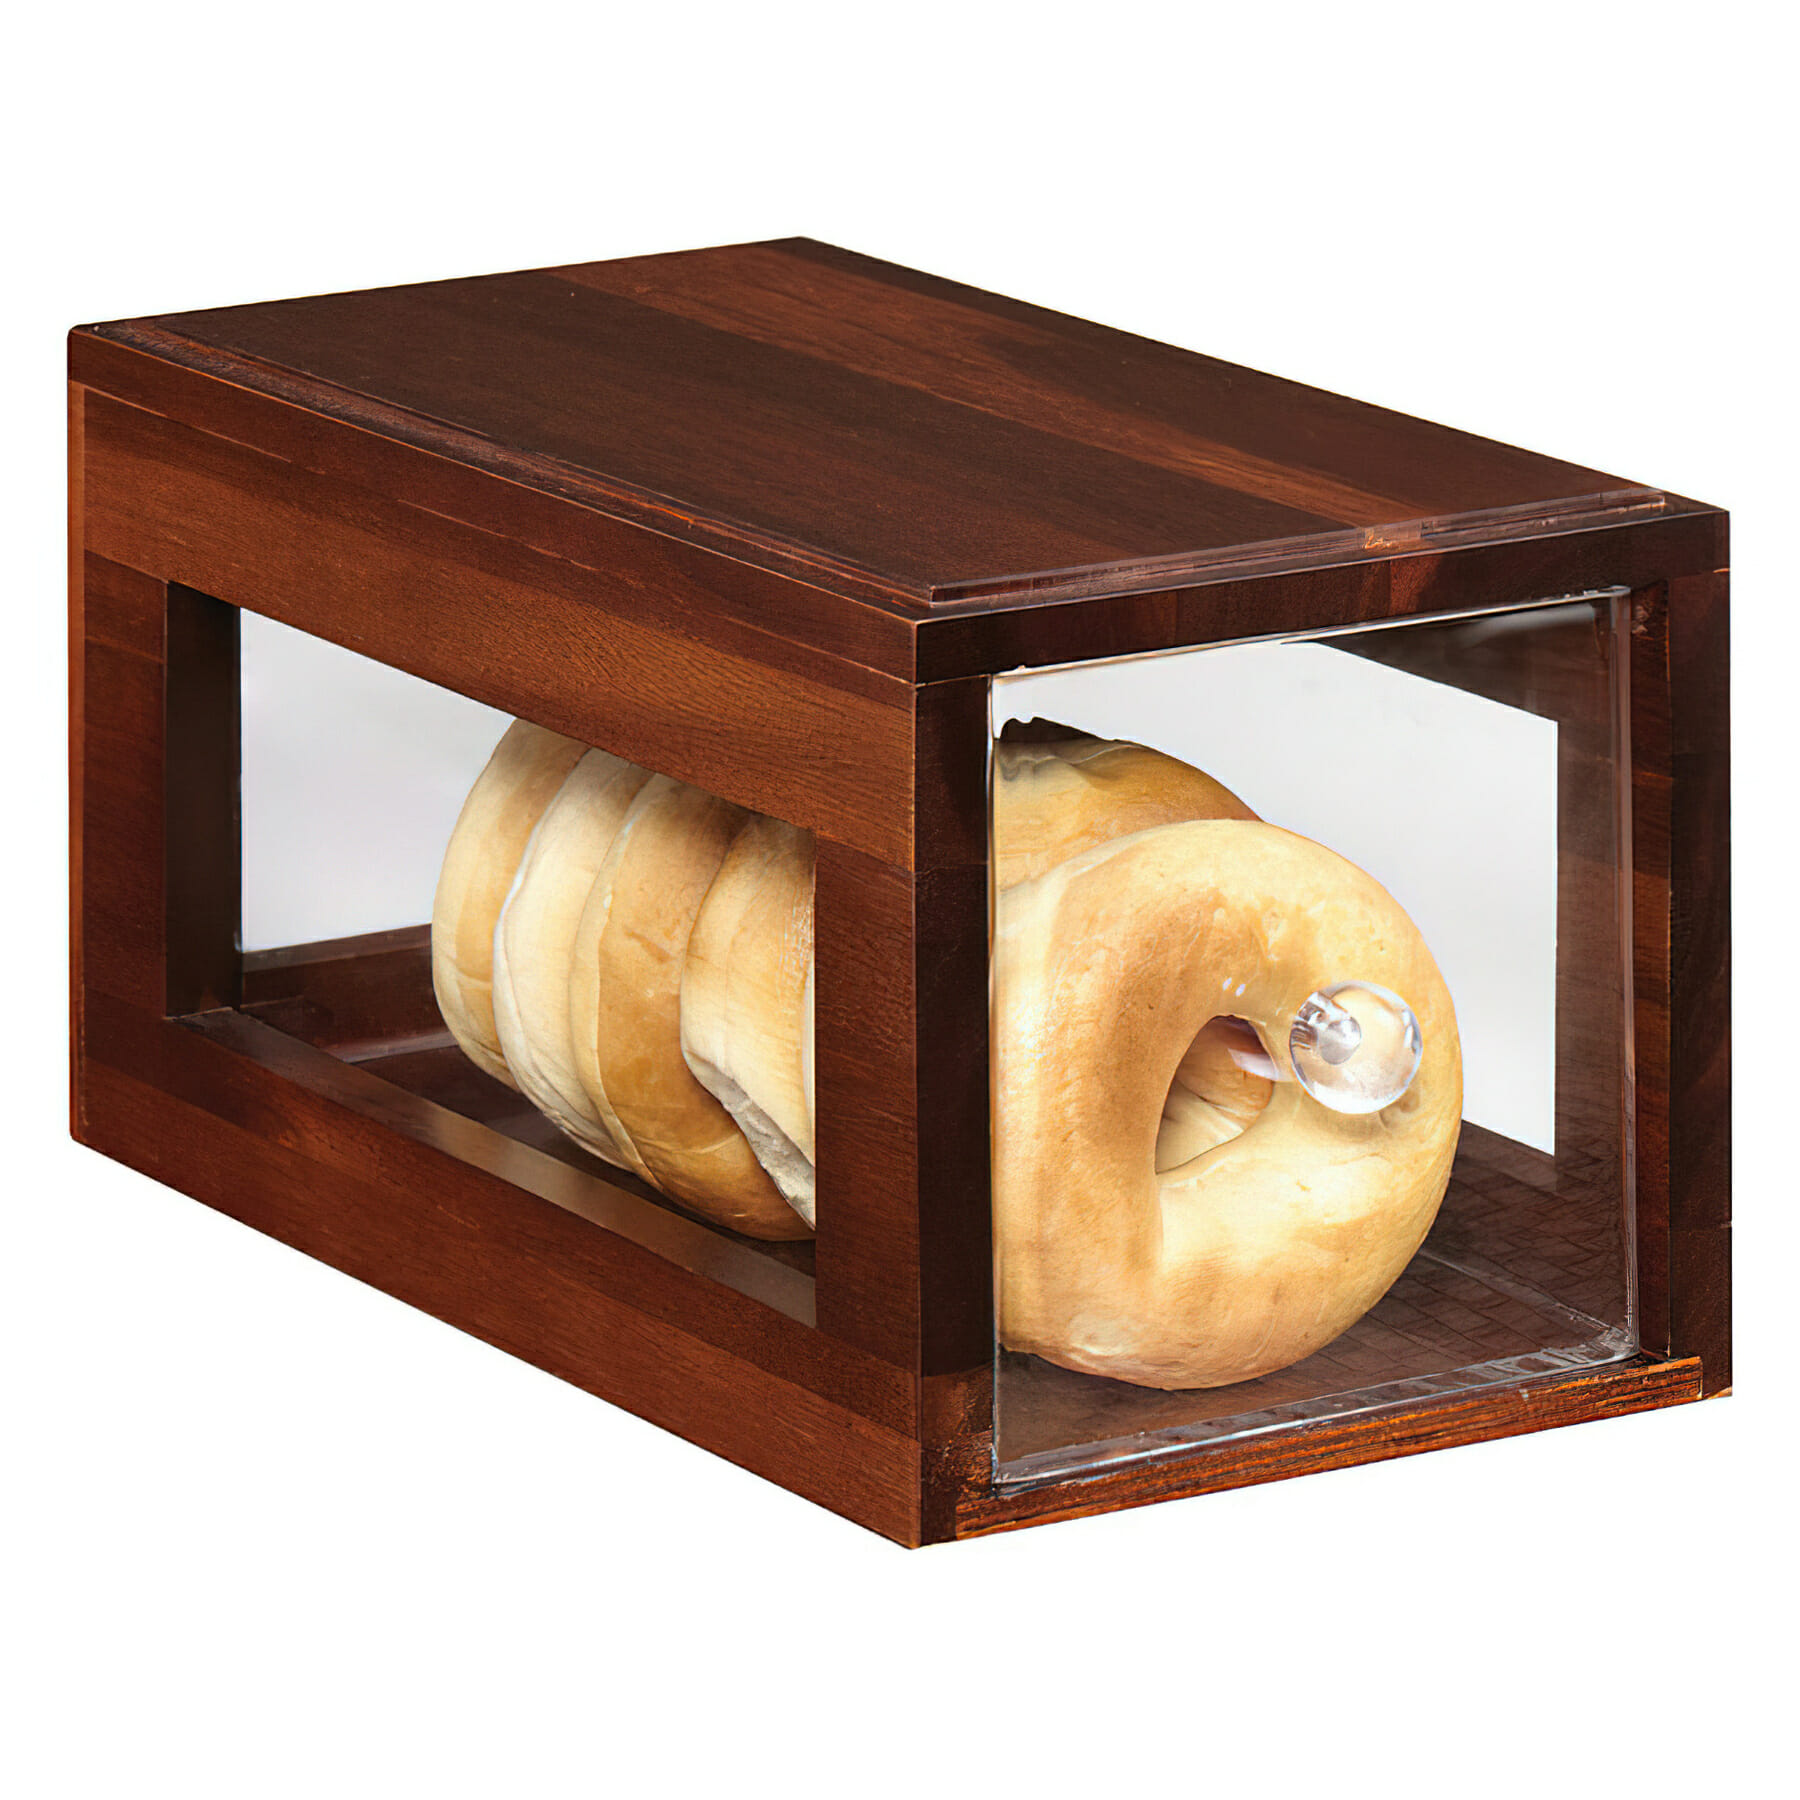 12.25" x 6" Square Stackable Wood Bread Box with Acrylic Drawer, 6" tall